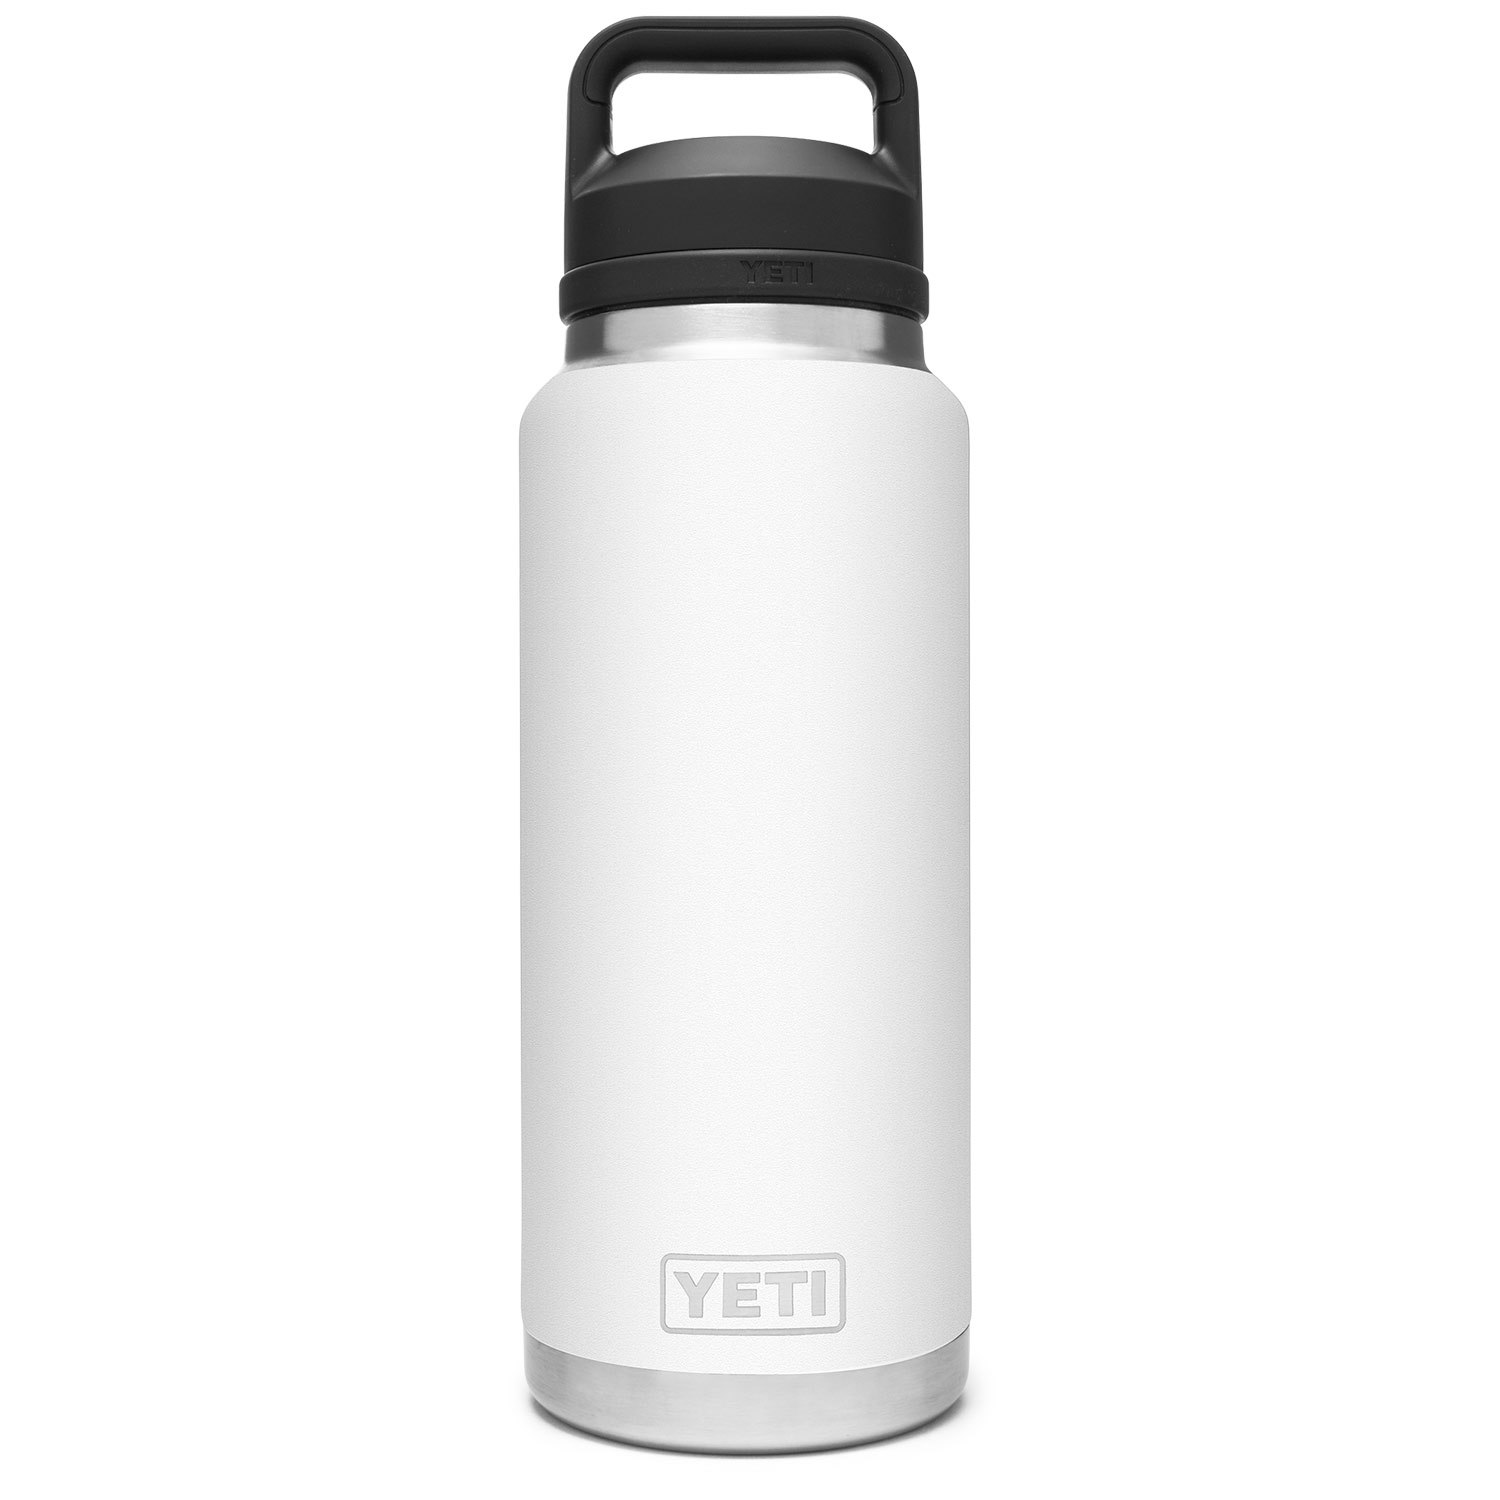 AWESE Replacement Cap Lid,Fits for 18oz/36oz/64oz YETI Rambler Bottle